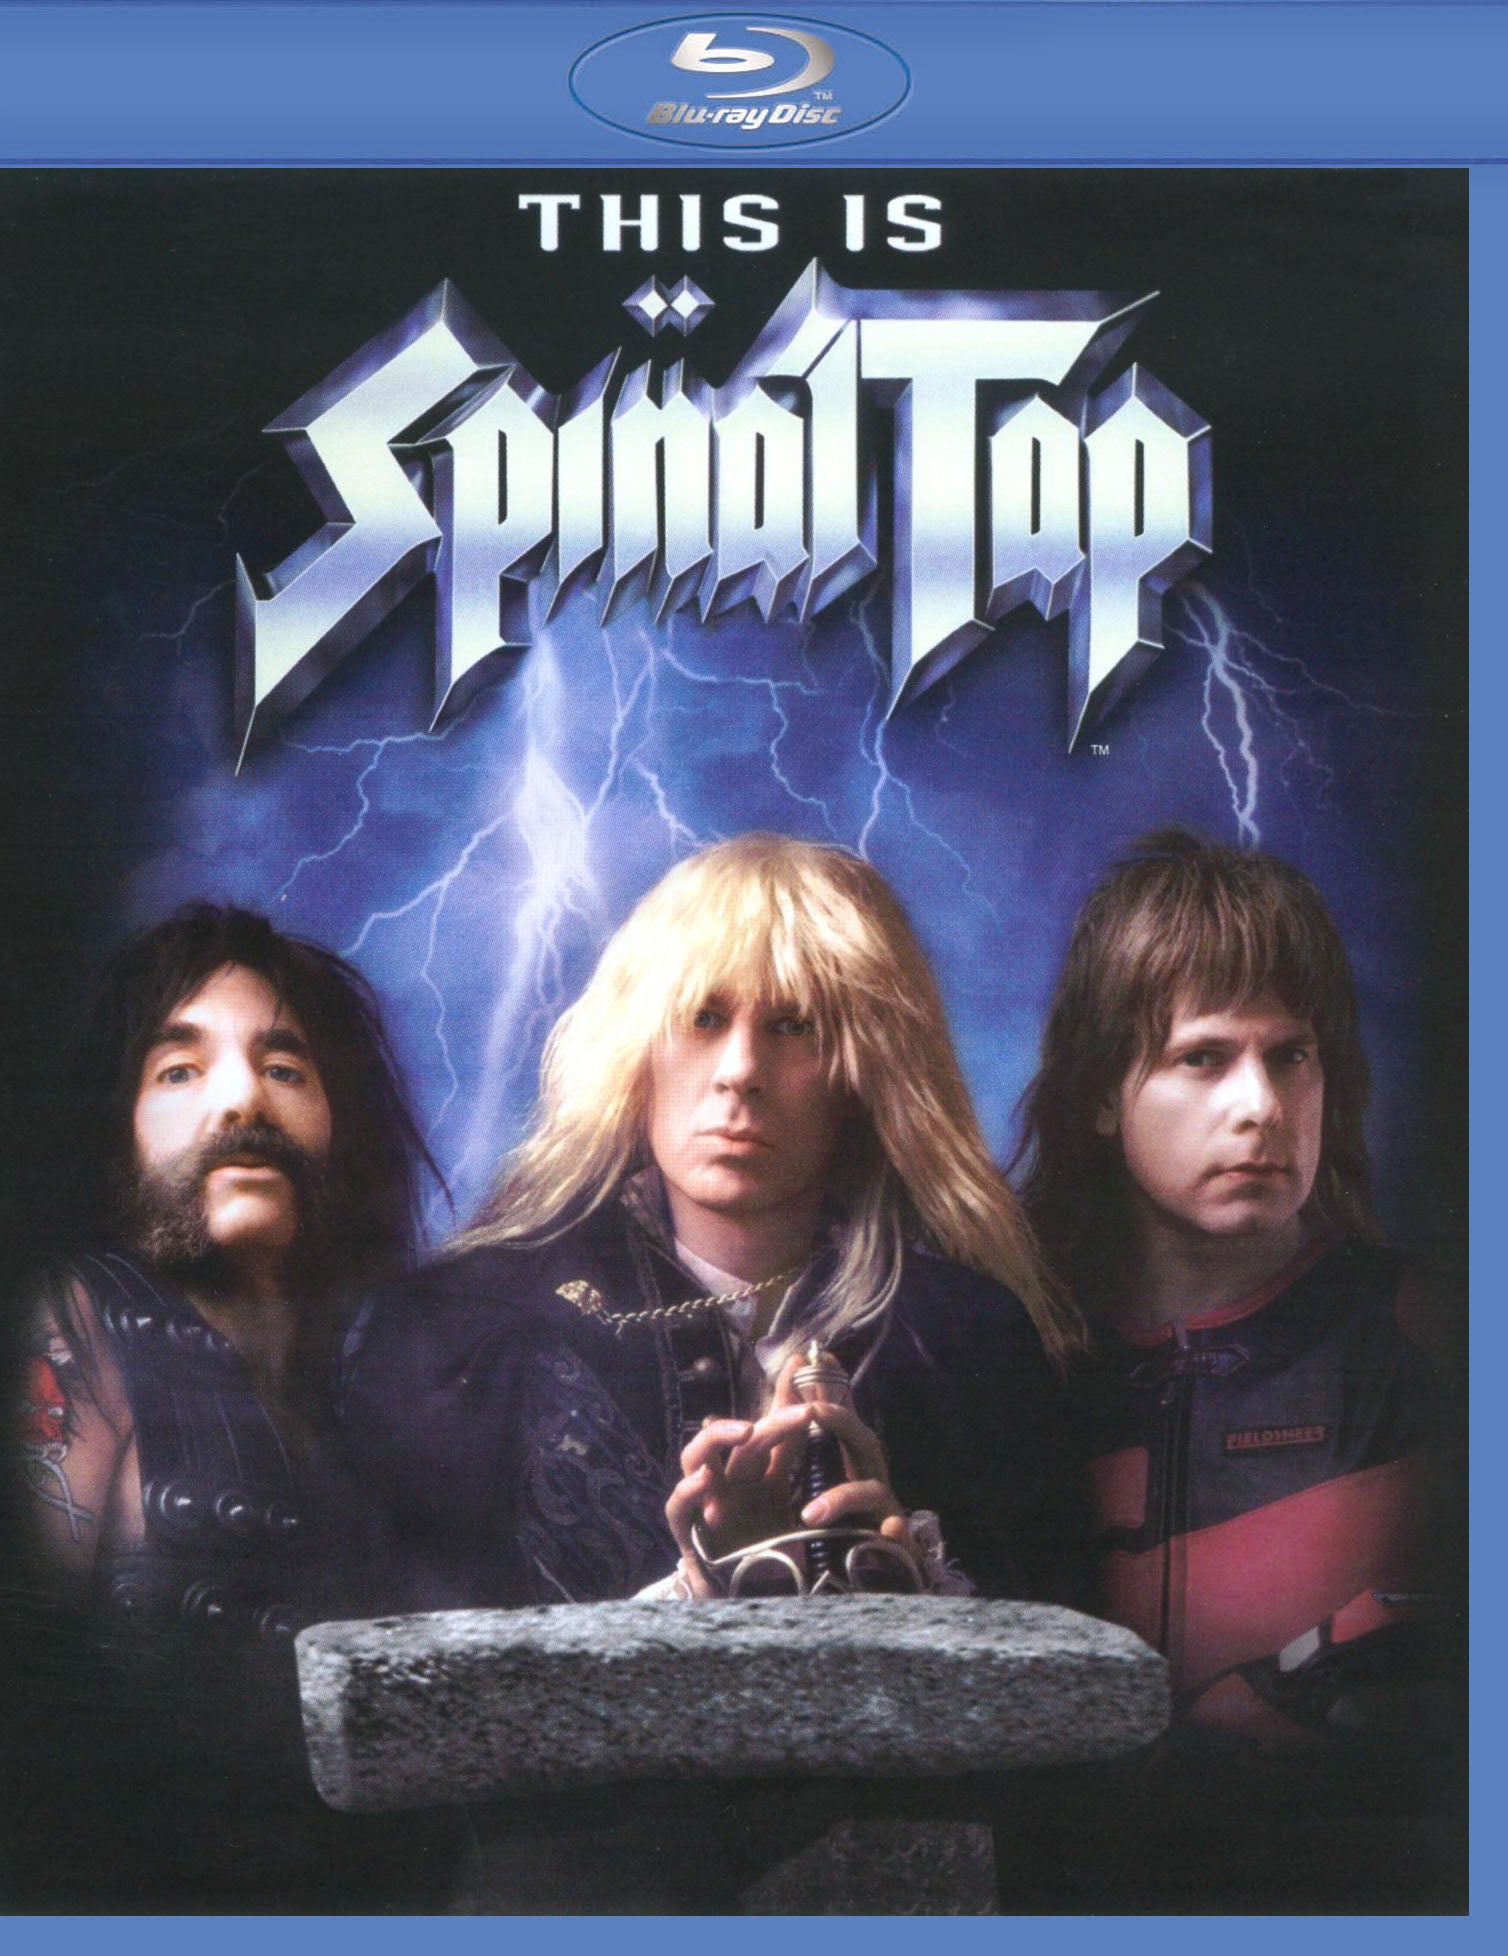 This Is Spinal Tap [WS] [Blu-ray] cover art